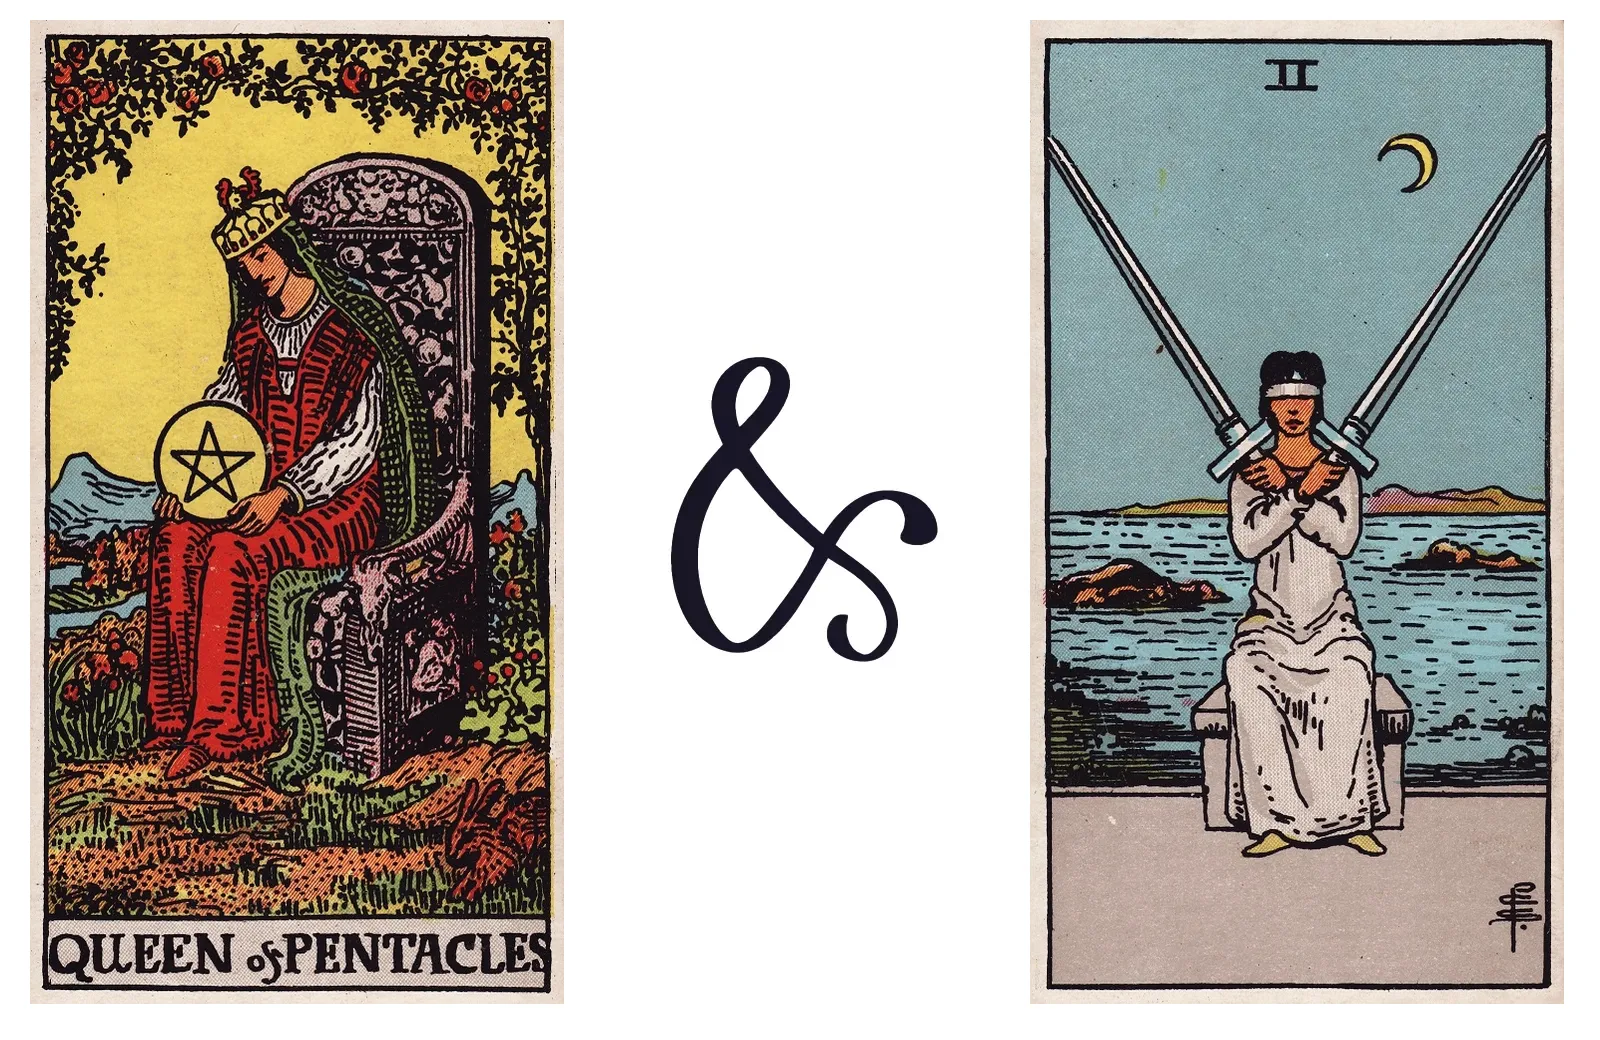 Queen of Pentacles and Two of Swords